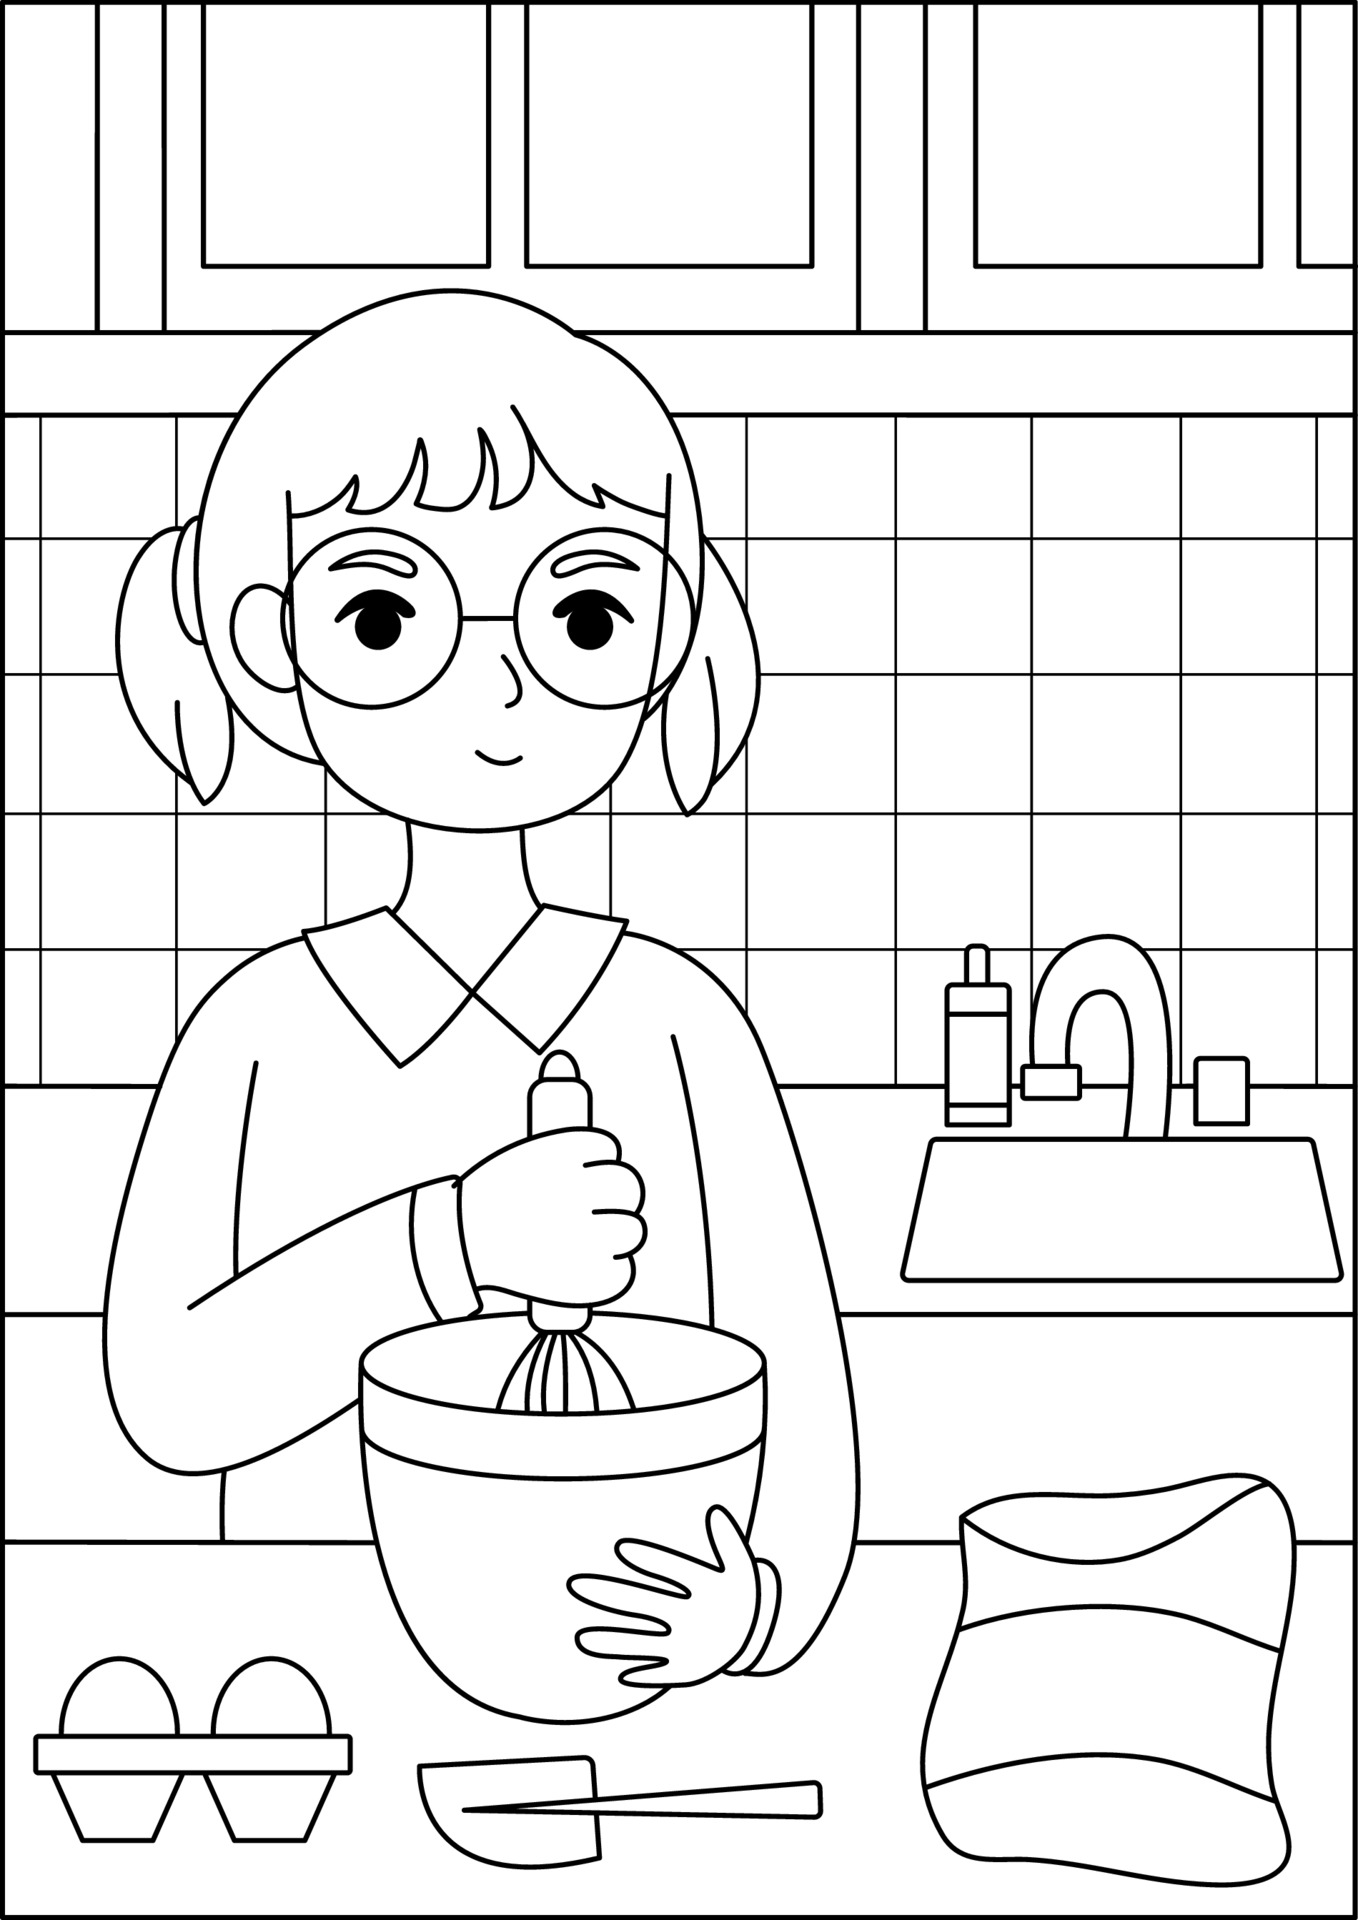 https://static.vecteezy.com/system/resources/previews/003/481/942/original/girl-cooking-coloring-page-activity-for-kids-free-vector.jpg